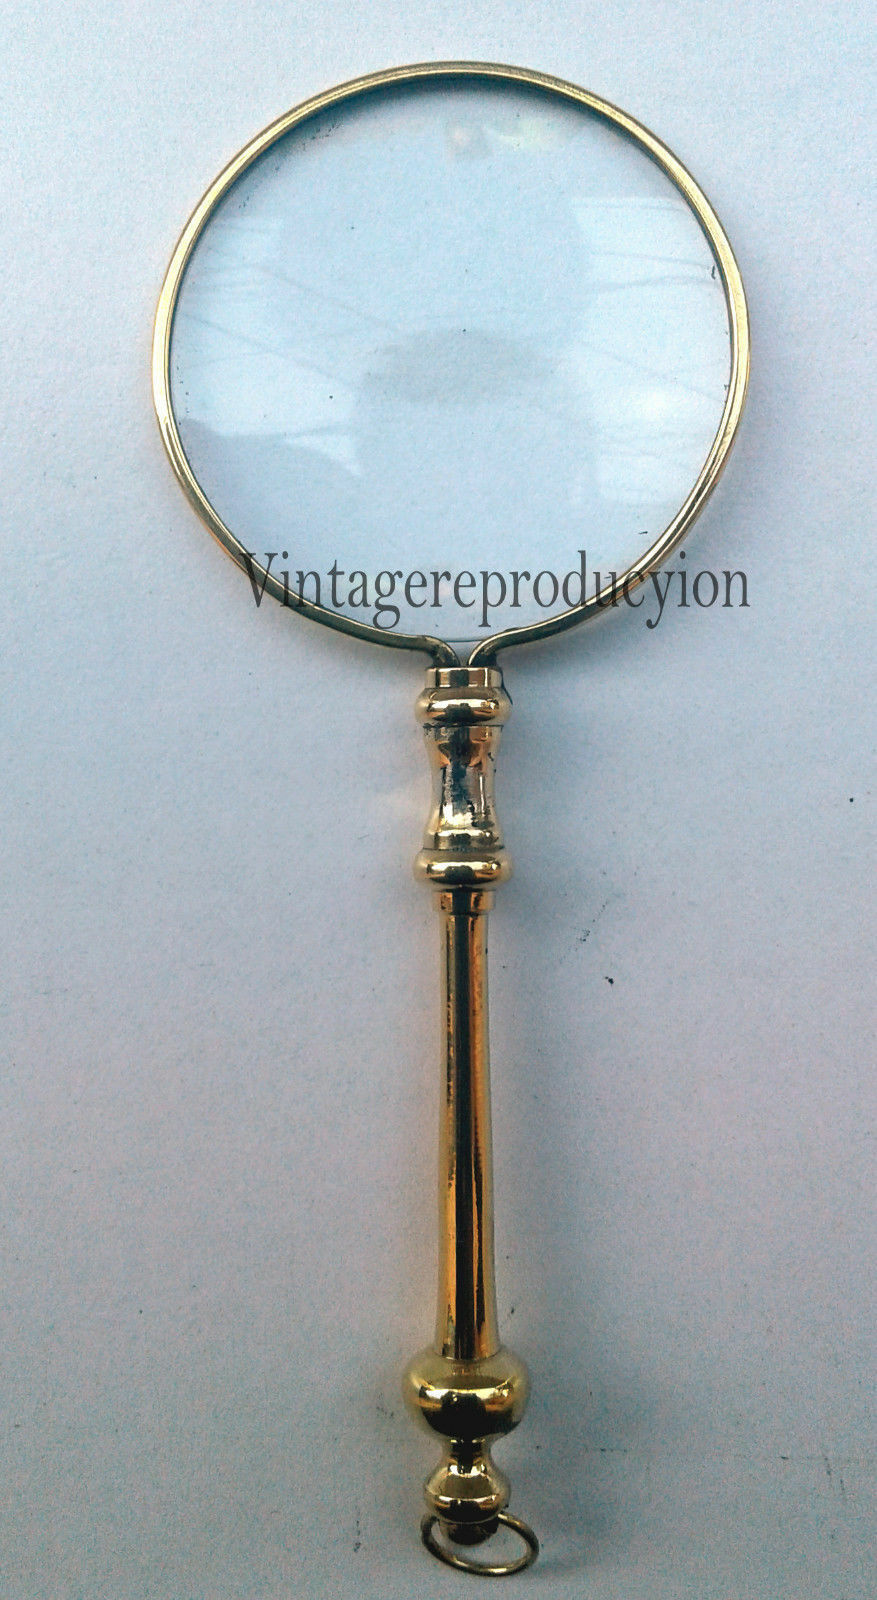  magnifying glass table top decorative collectible nautical vintage brass Gift 